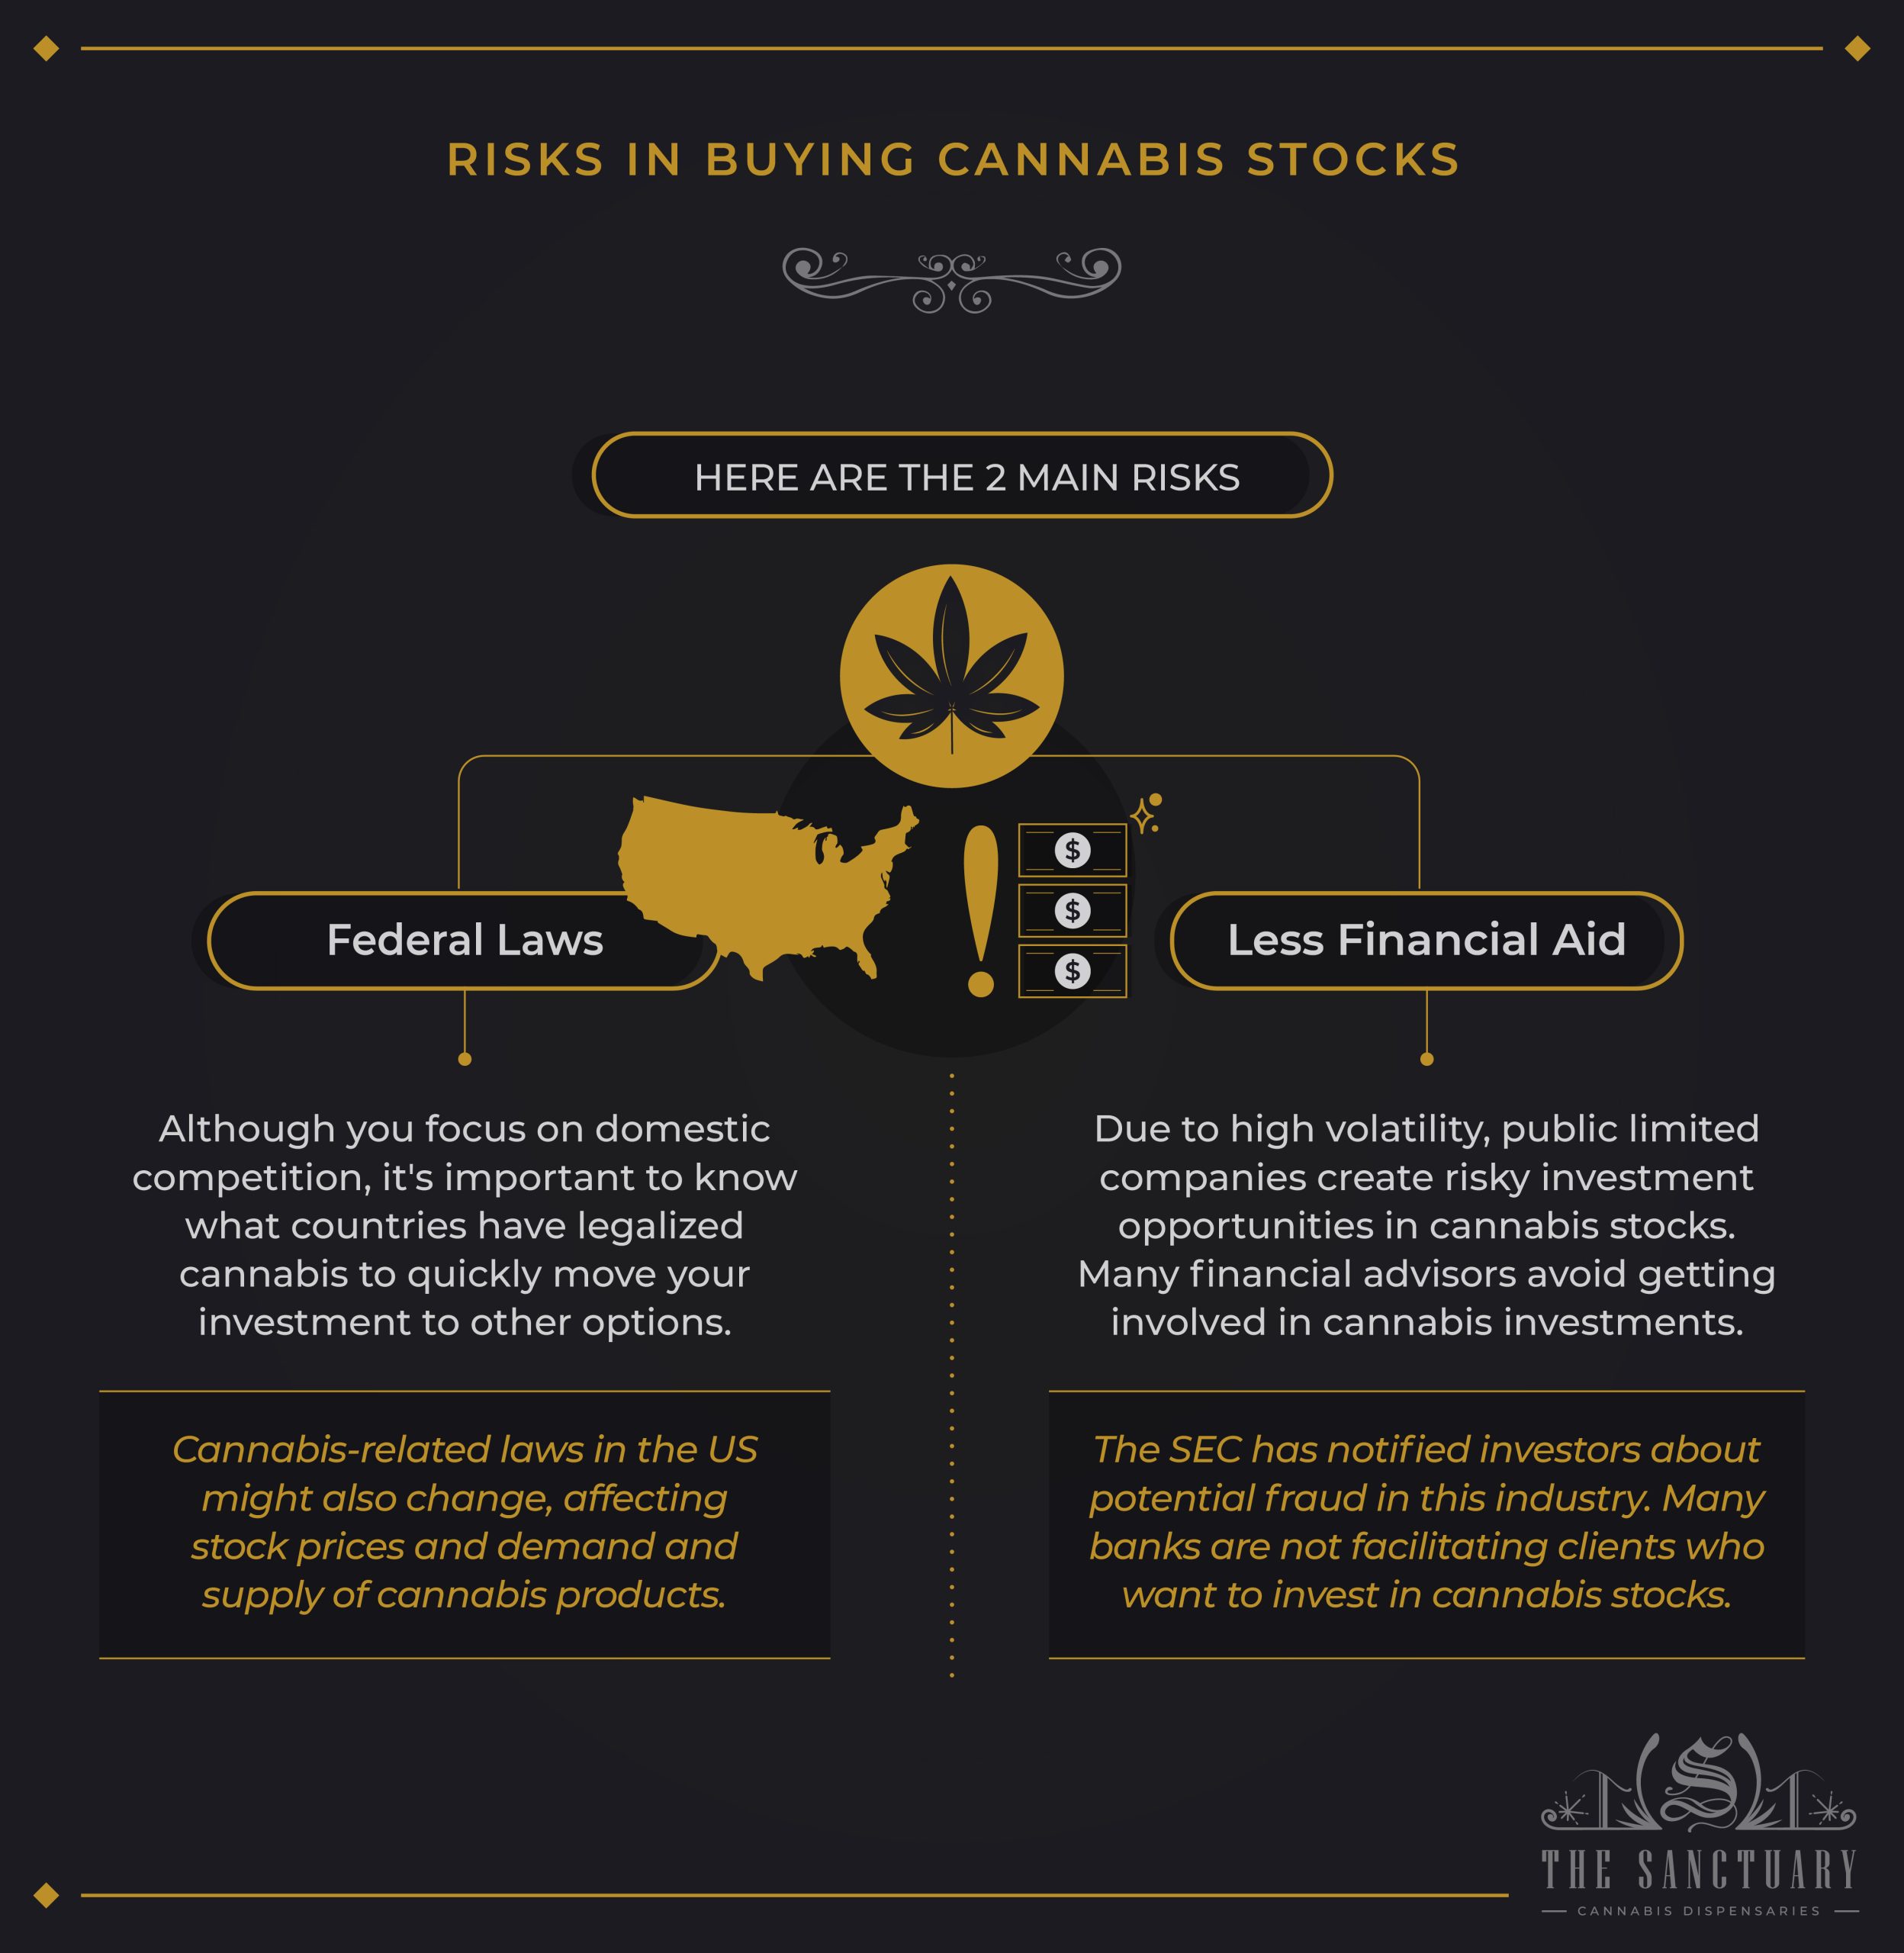 Risks in Buying Cannabis Stocks